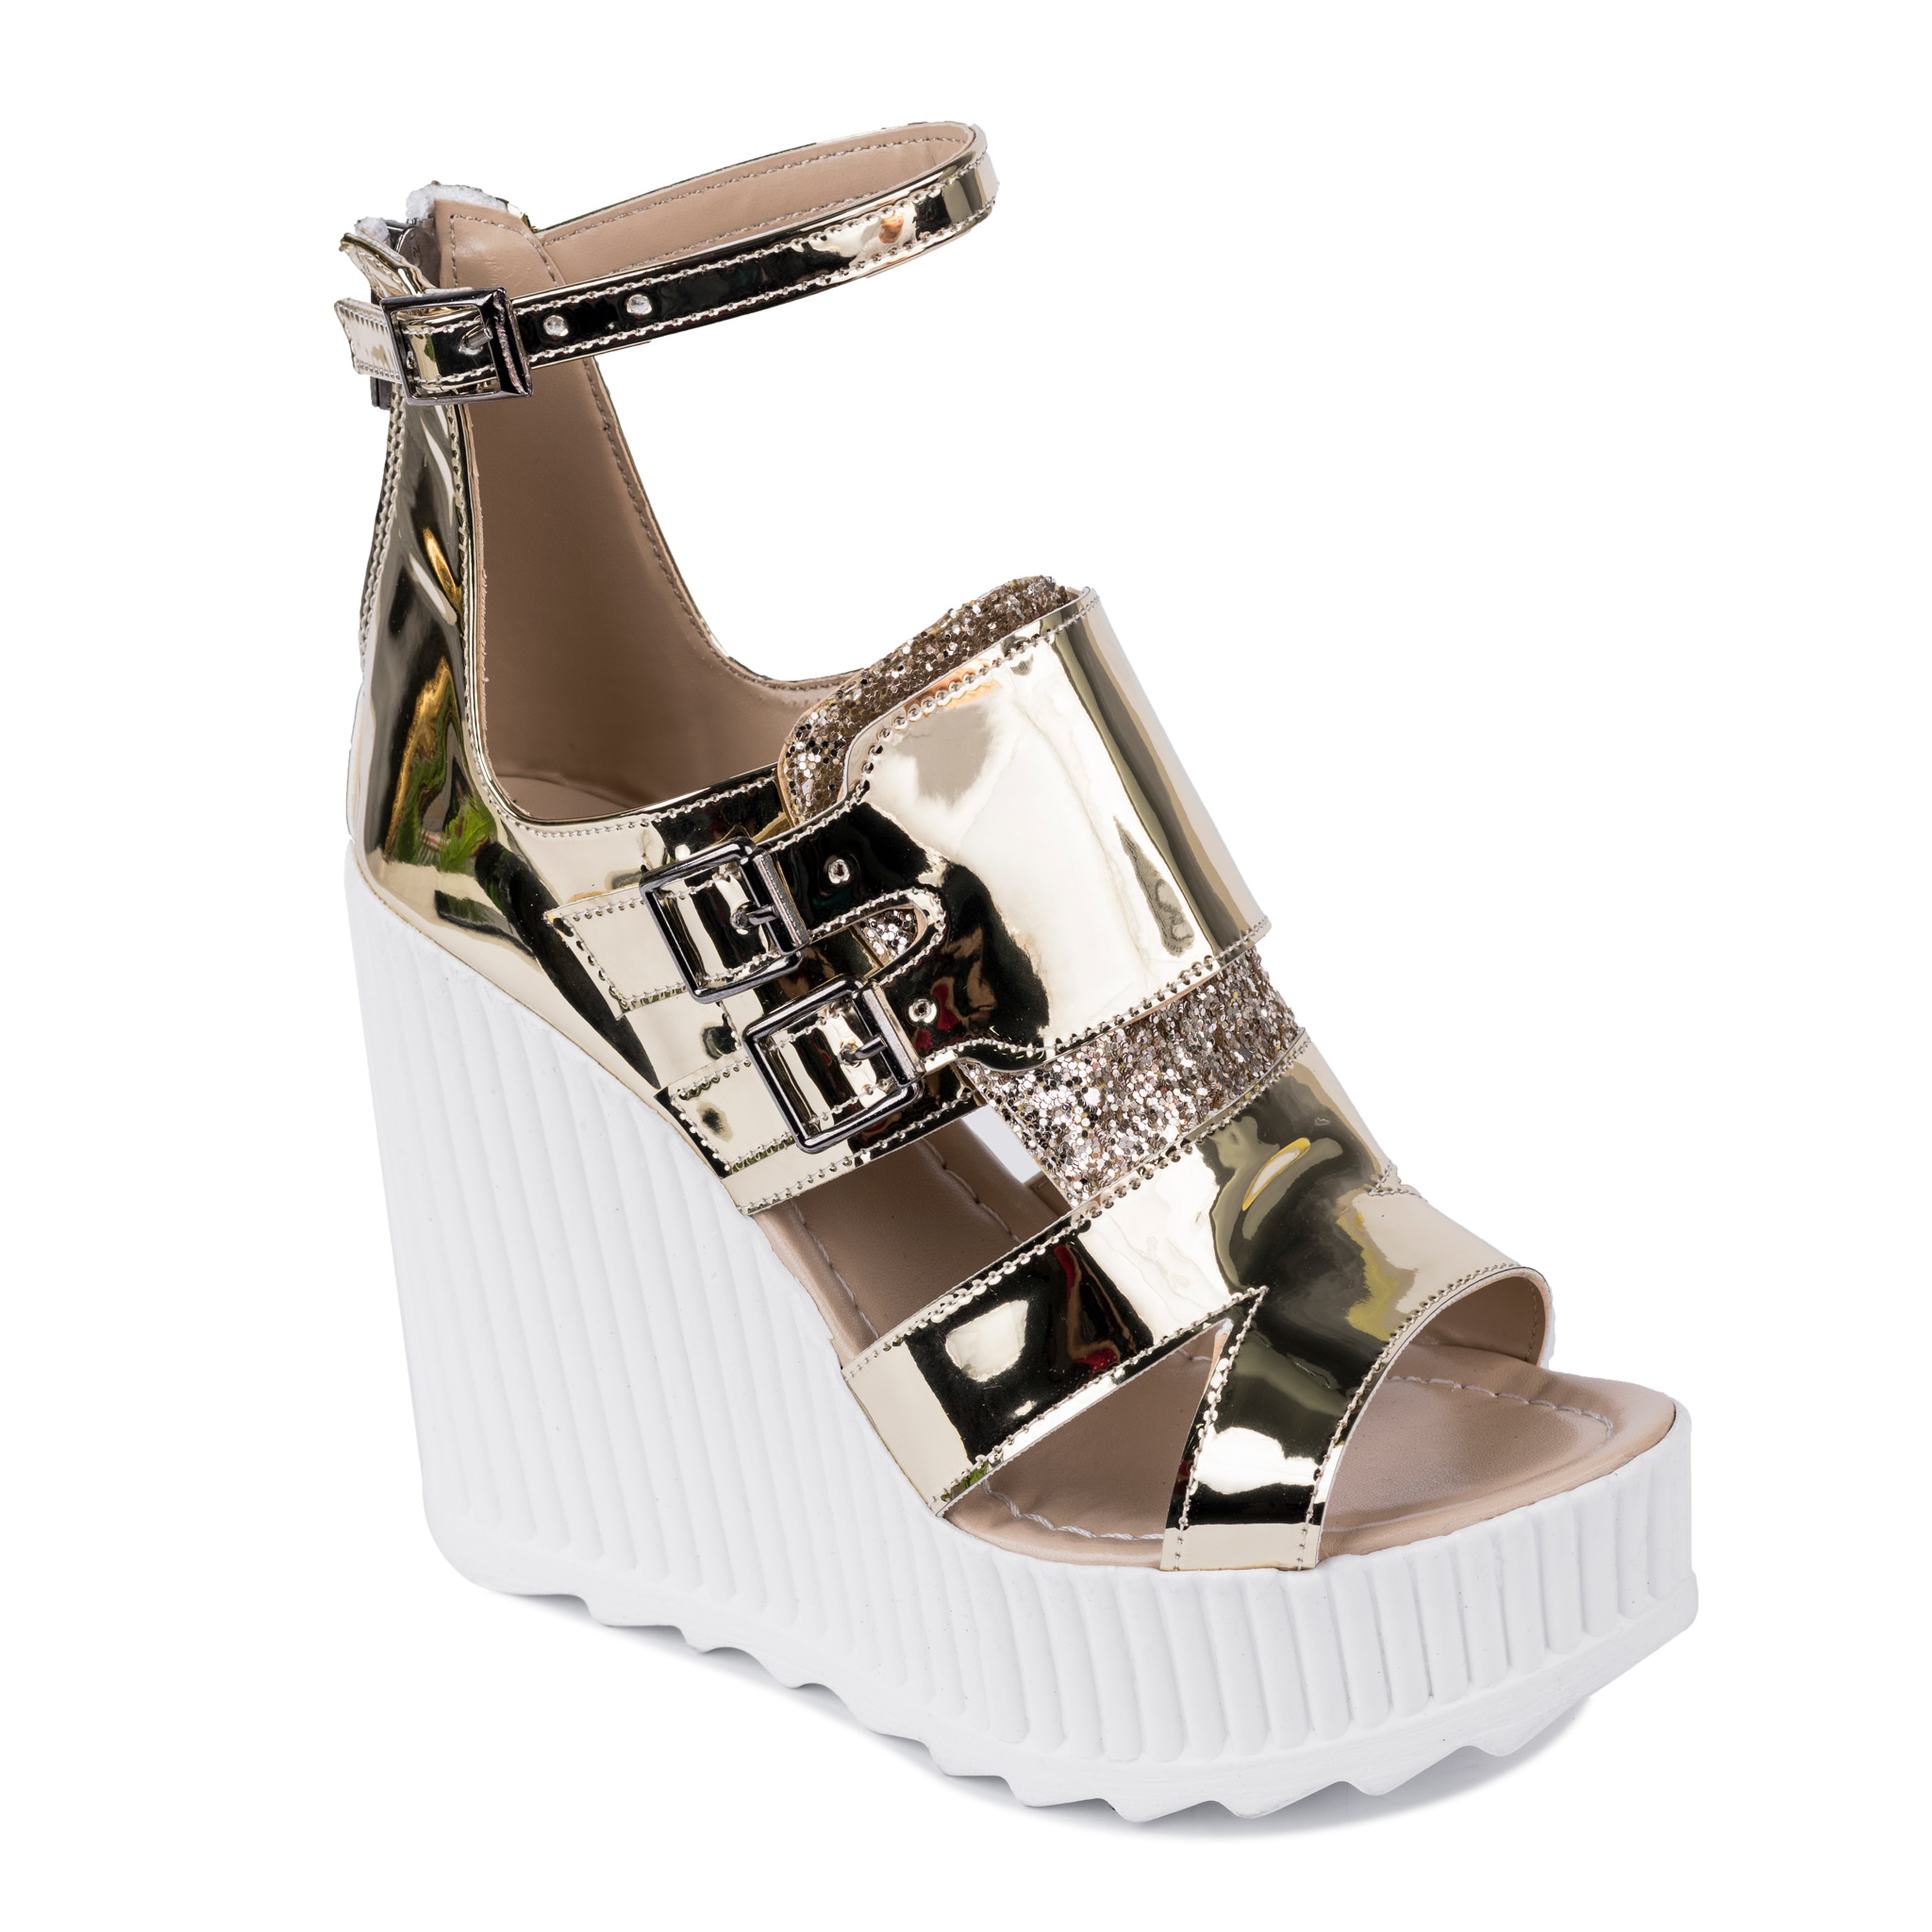 PATENT WEDGE SANDALS WITH BELTS - GOLD